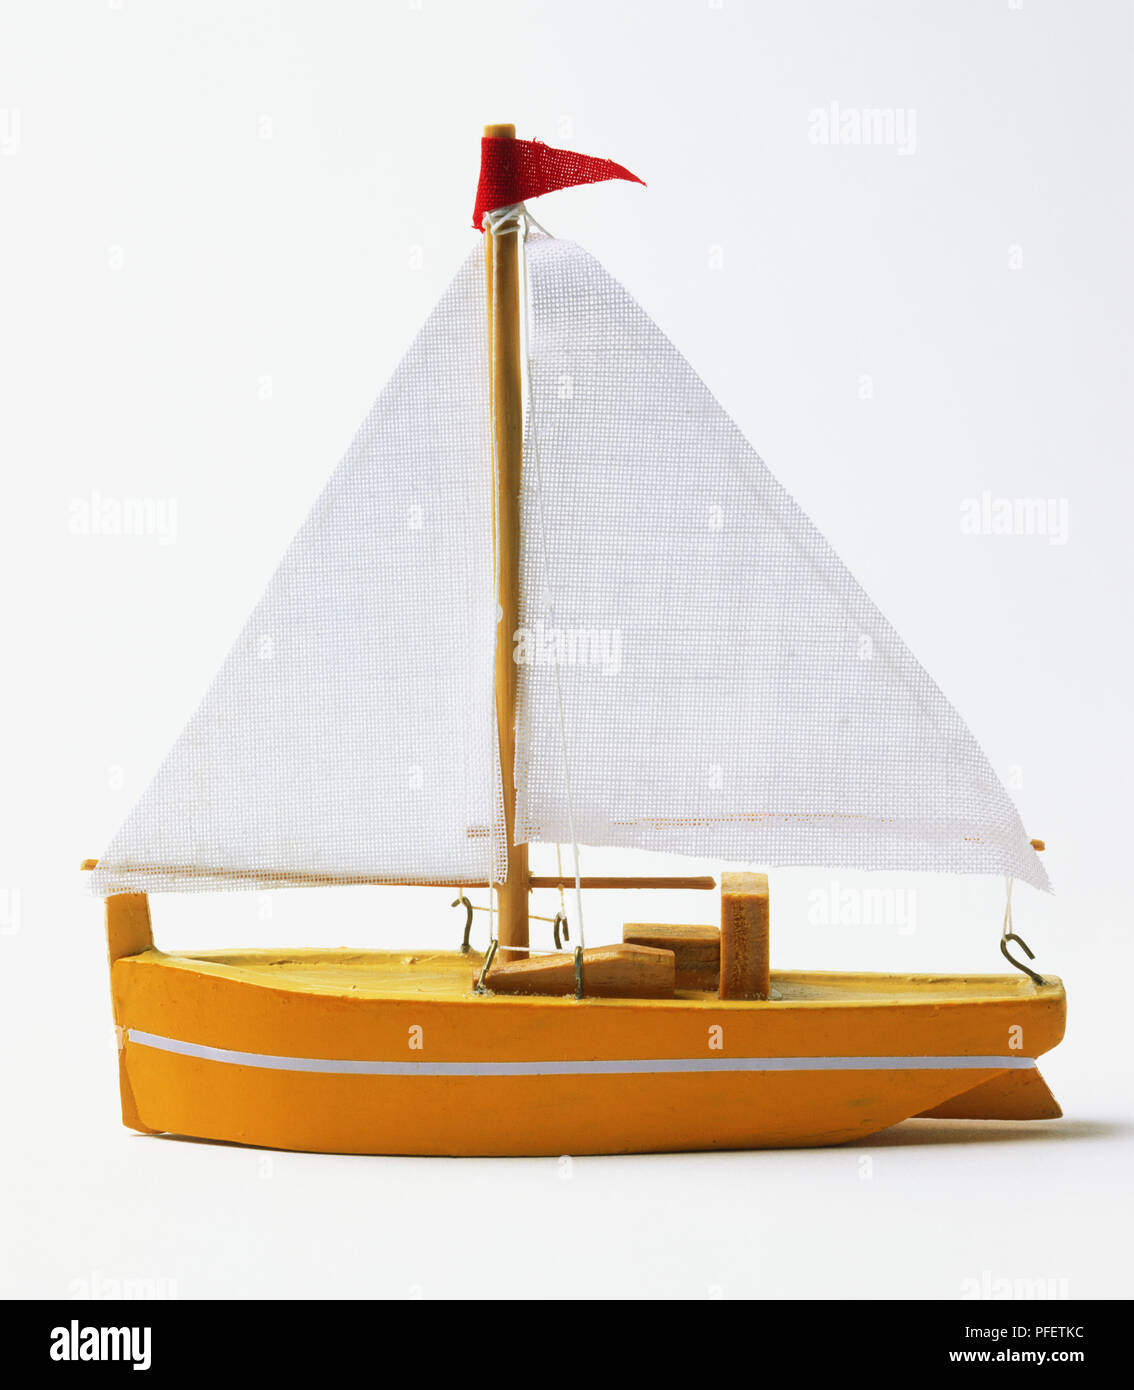 An orange and white toy sailing boat Stock Photo